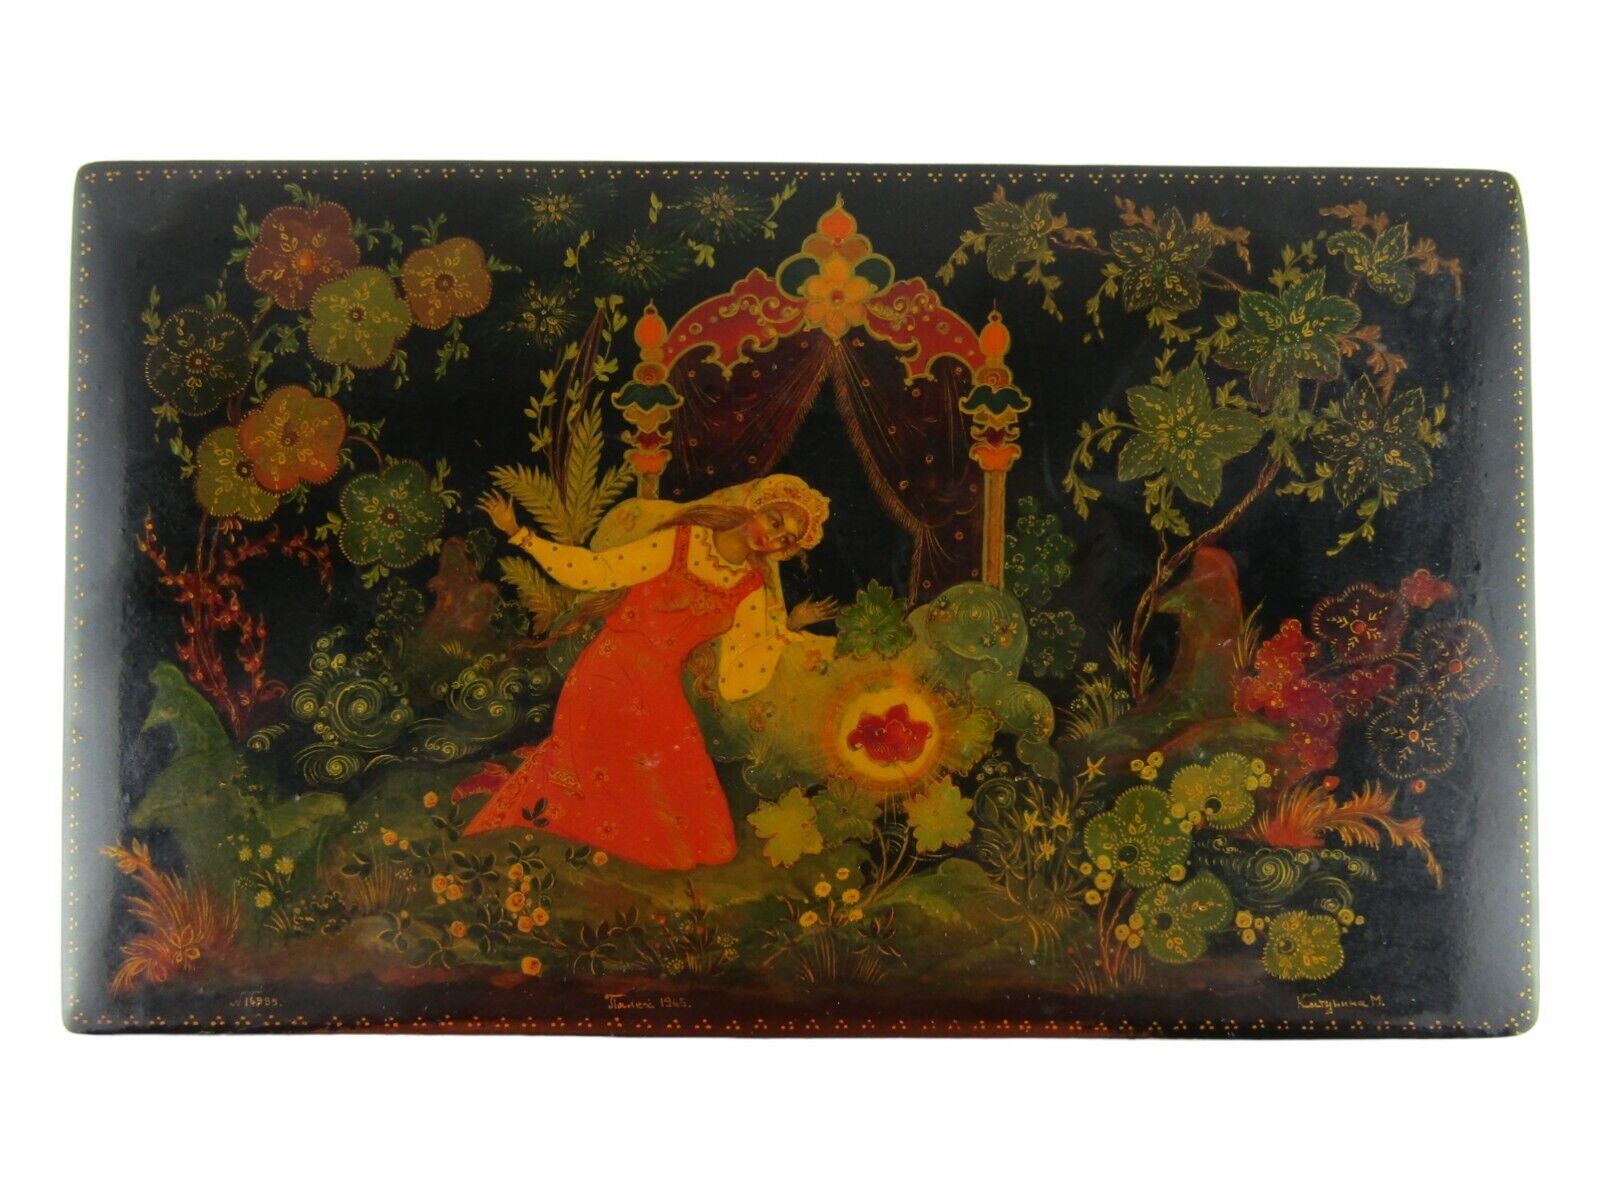 Vintage 1965 Large Scarlet Flower Russian Fairytale Lacquer Box Hand Painted